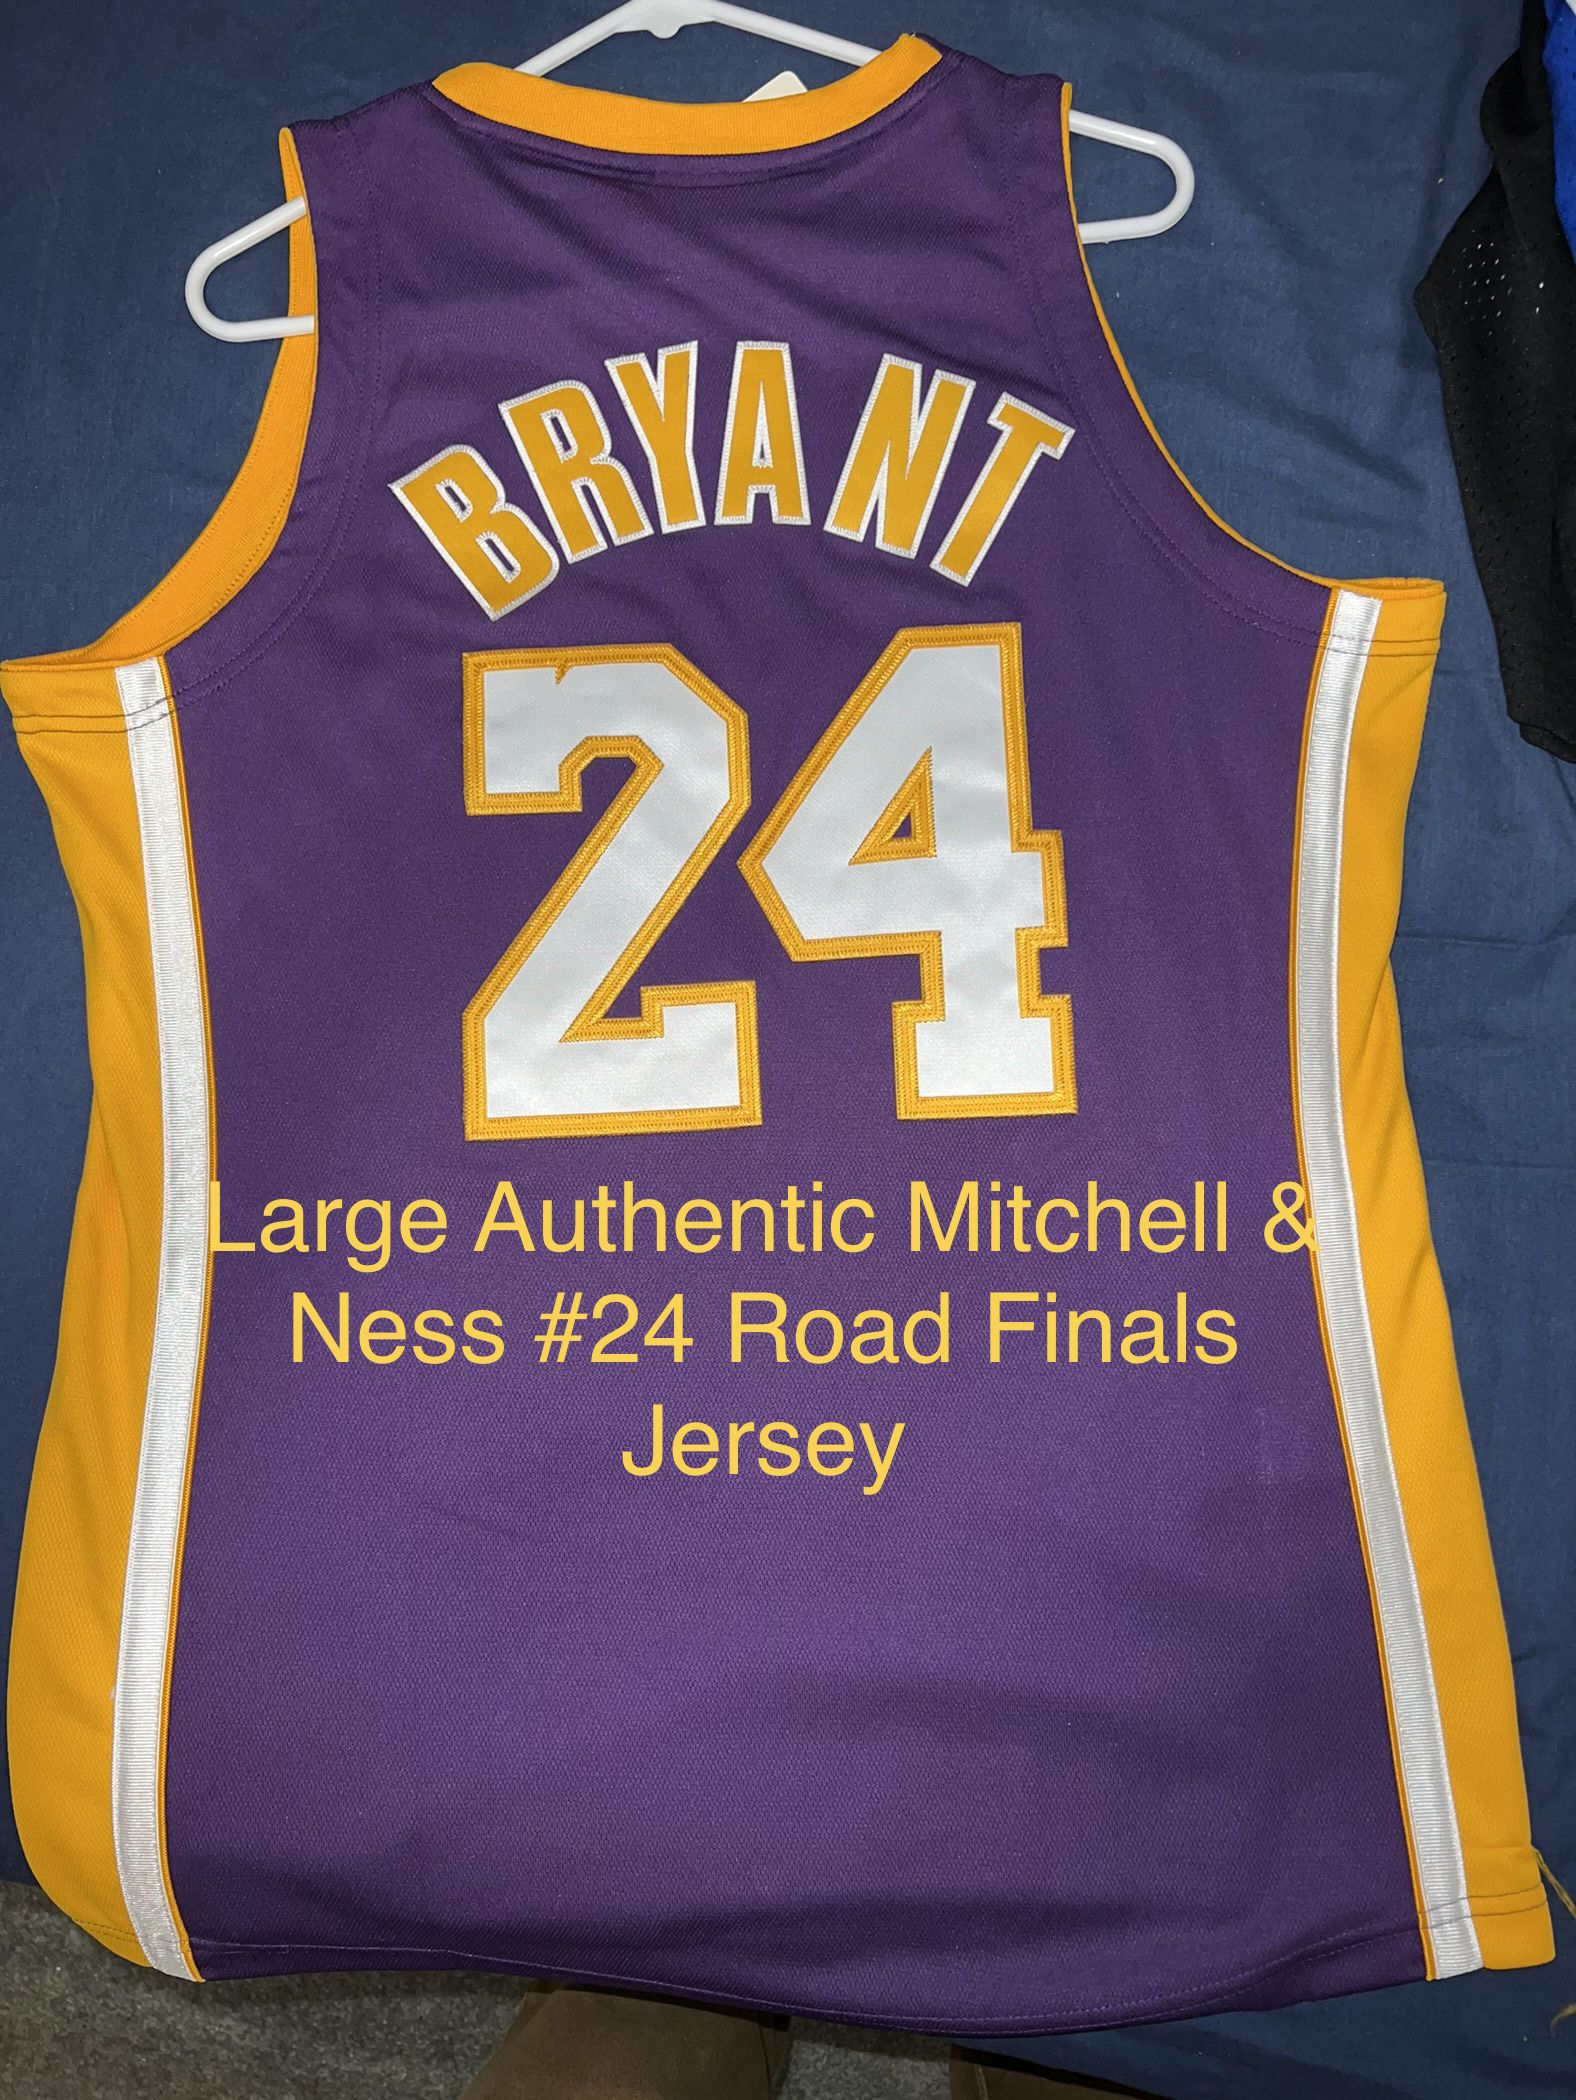 Kobe Bryant Los Angeles Lakers Mitchell & Ness Hardwood Classics 2007-2008  Jersey - Gold for Sale in Tustin, CA - OfferUp